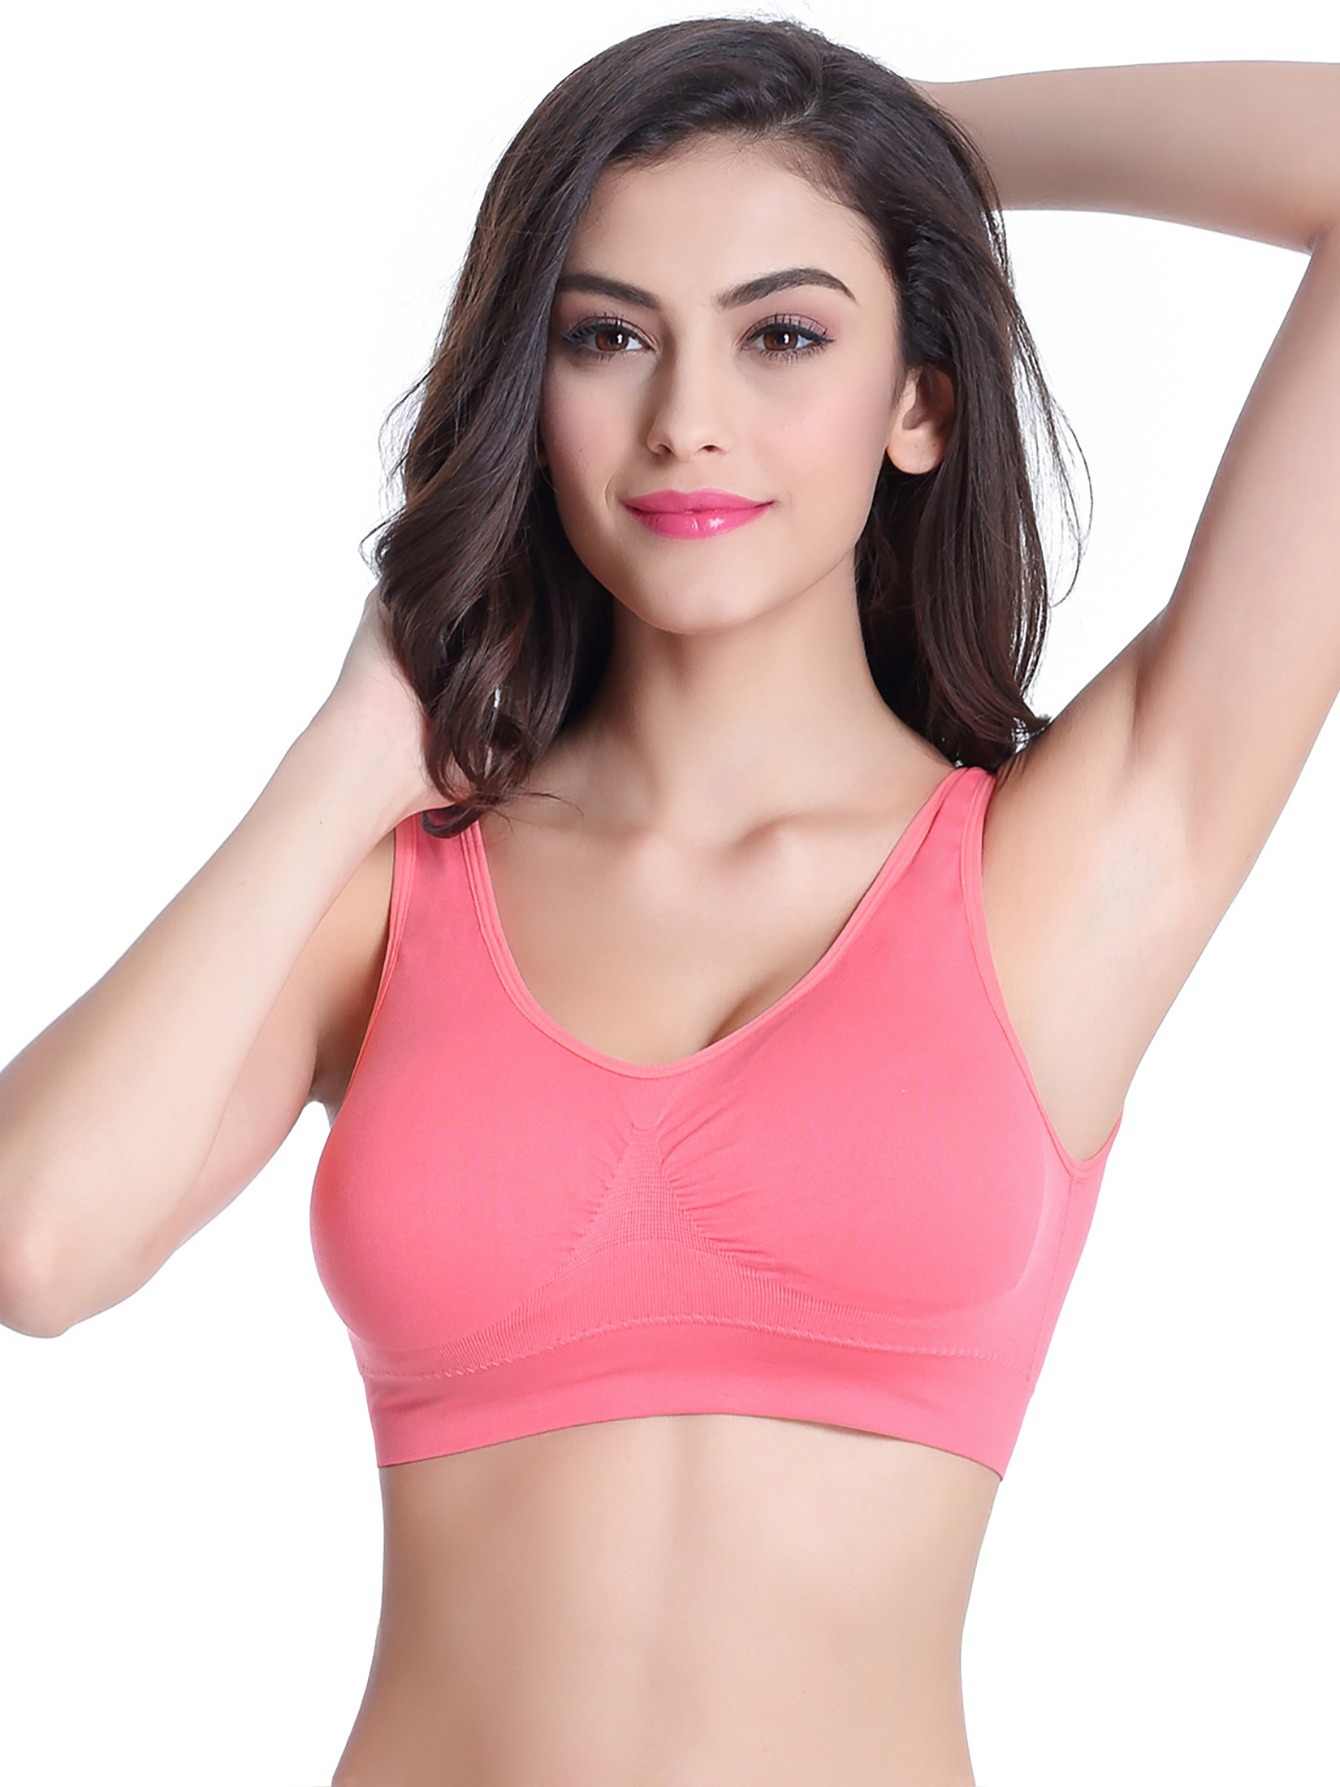 Women Seamless Bras Thin Solid Color kids Underwear Push Up Lingerie  Wireless Bralette Girl Fashion Brassiere A B Cup Tube Top